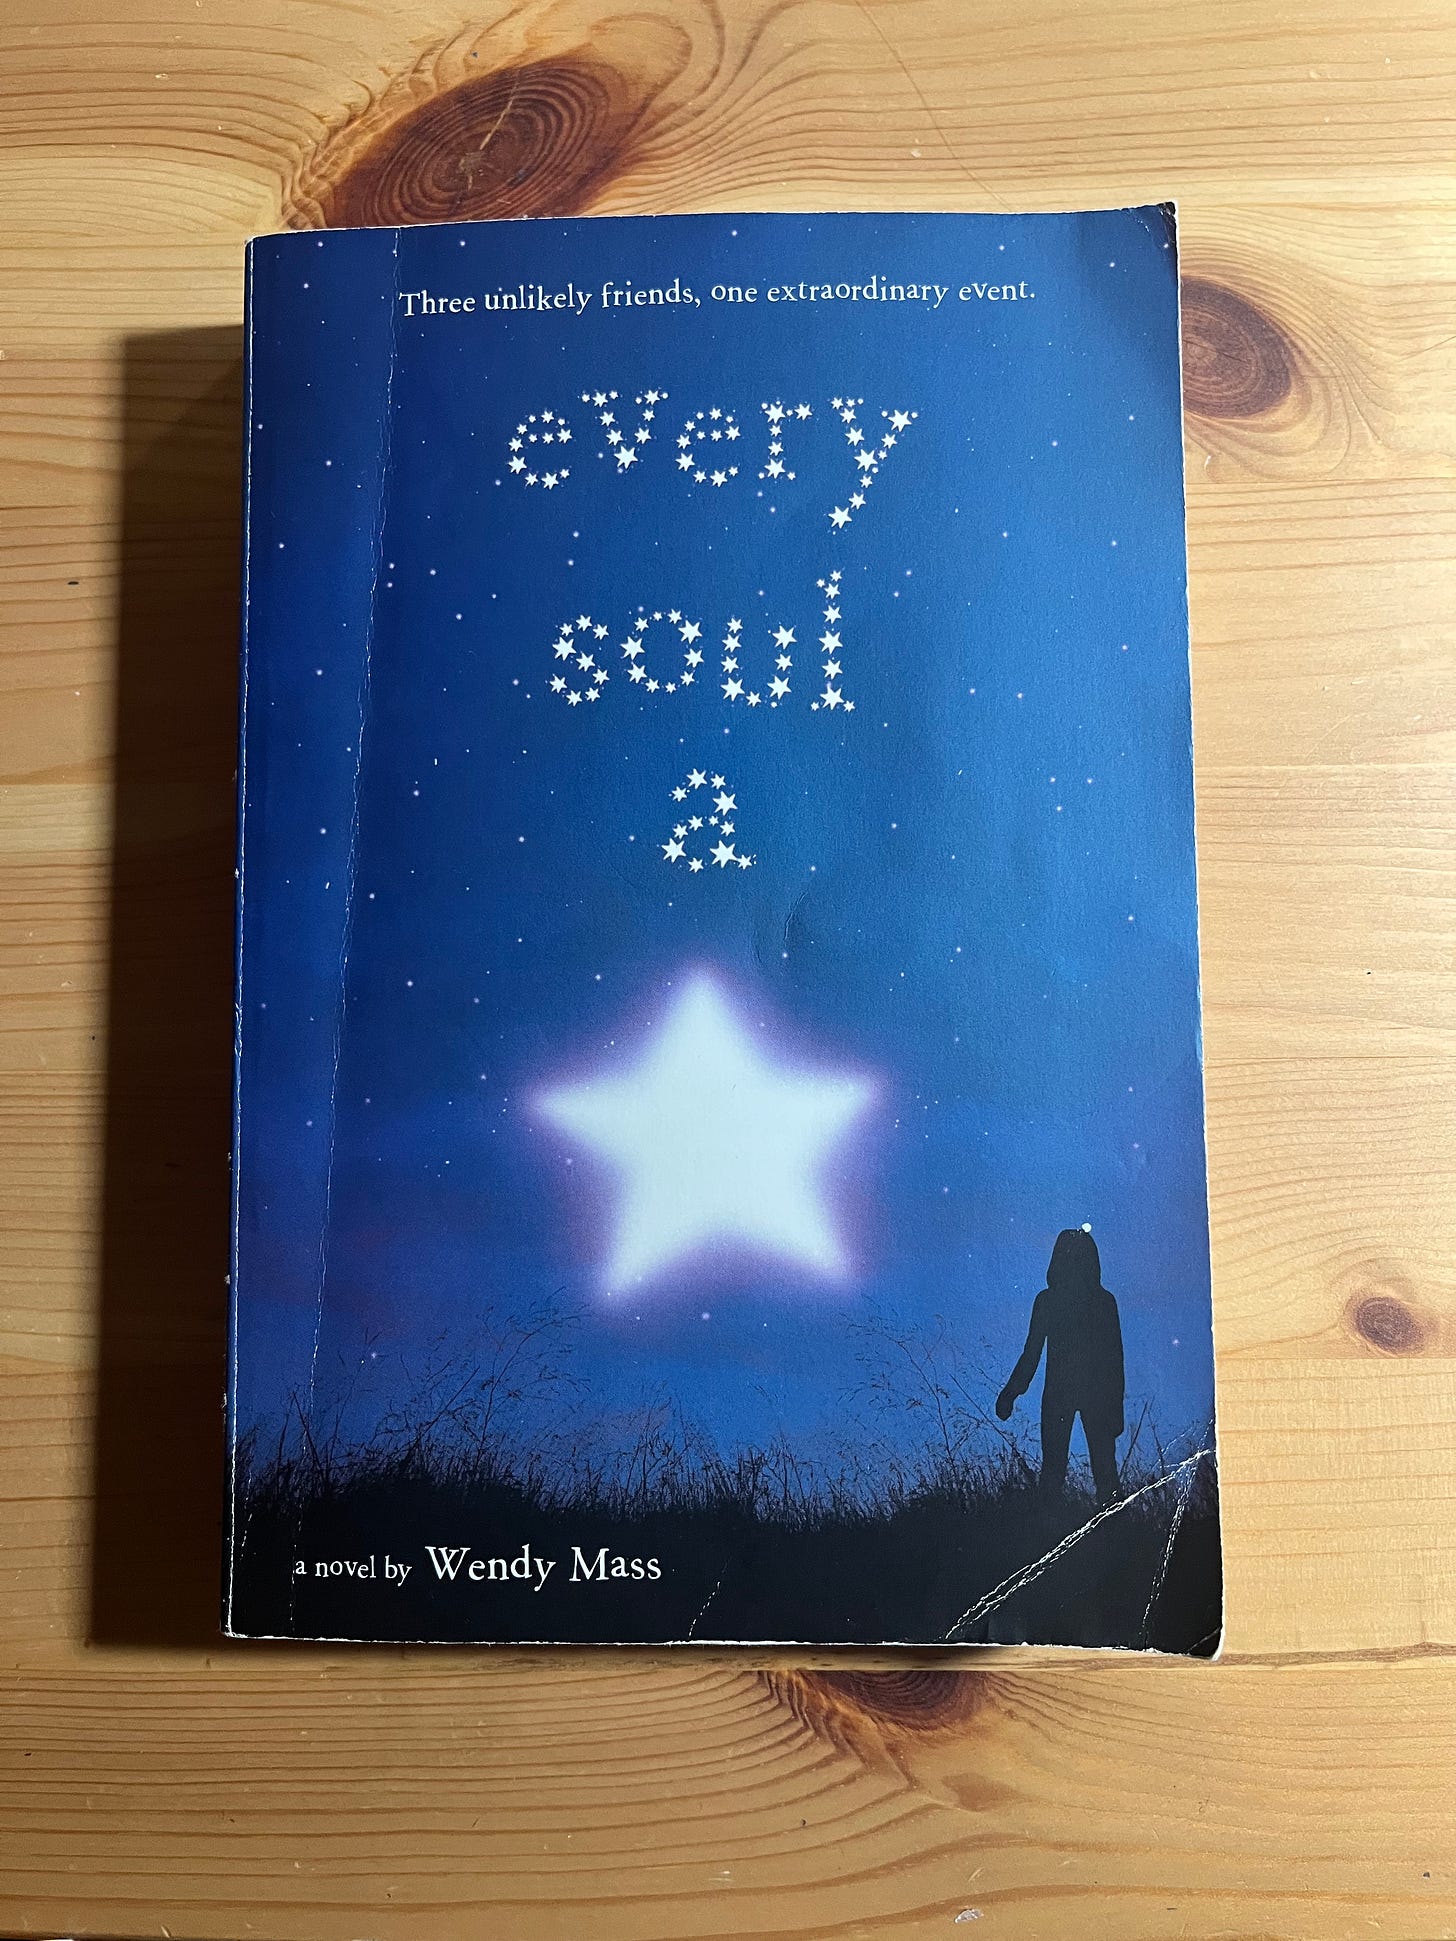 A blue book. The cover depicts a silhouetted person on grass staring up at the blue-ish night sky where an exceptionally big star takes center-stage. The smaller stars spell out the title, "Every Soul A Star." The book is by Wendy Mass.